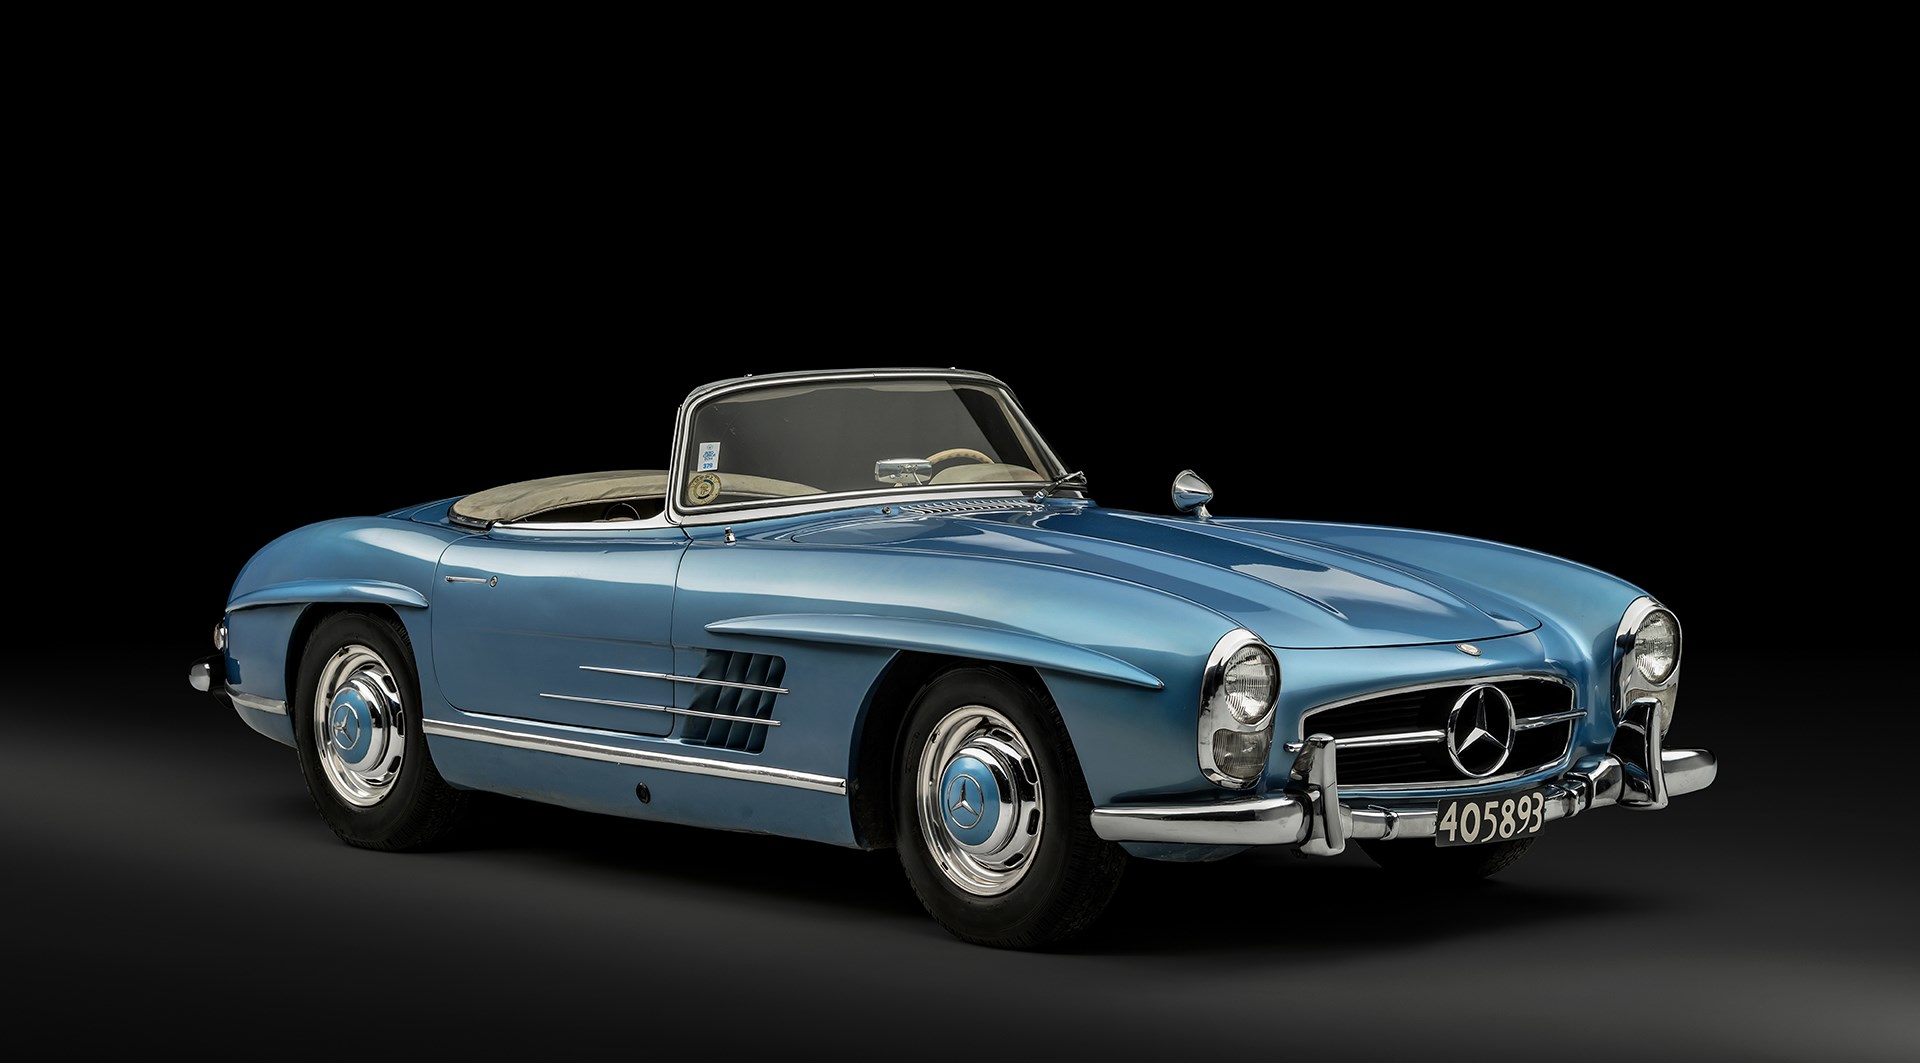 Fangio's 1958 Mercedes-Benz 300 SL Roadster offered by RM Sotheby's Private Sales